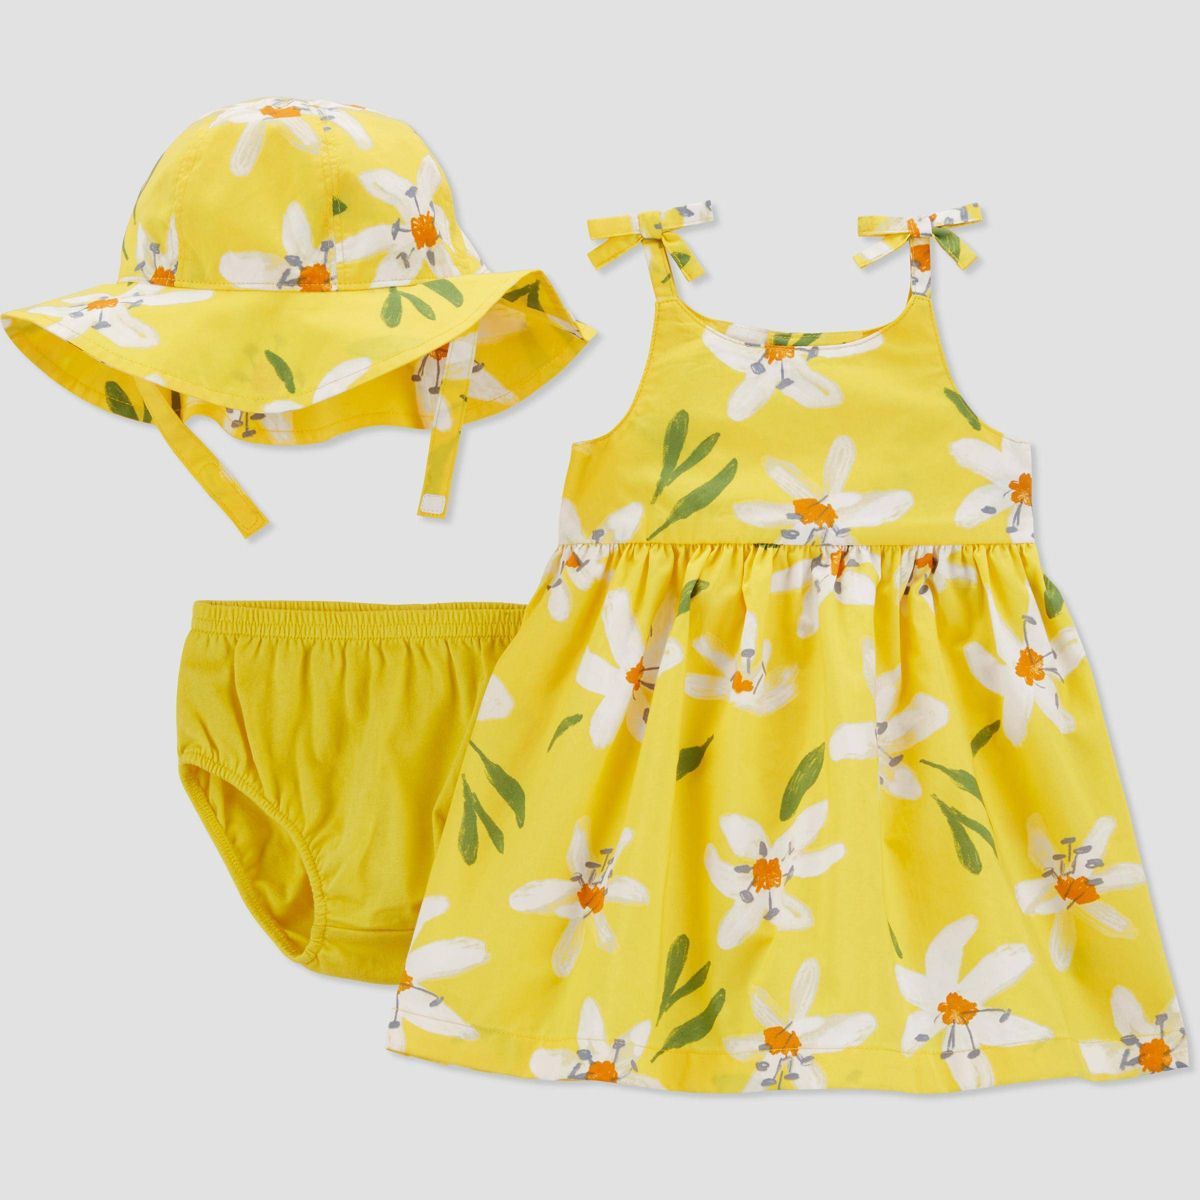 Carter's Just One You® Baby Girls' Floral Dress with Hat - Yellow/White | Target